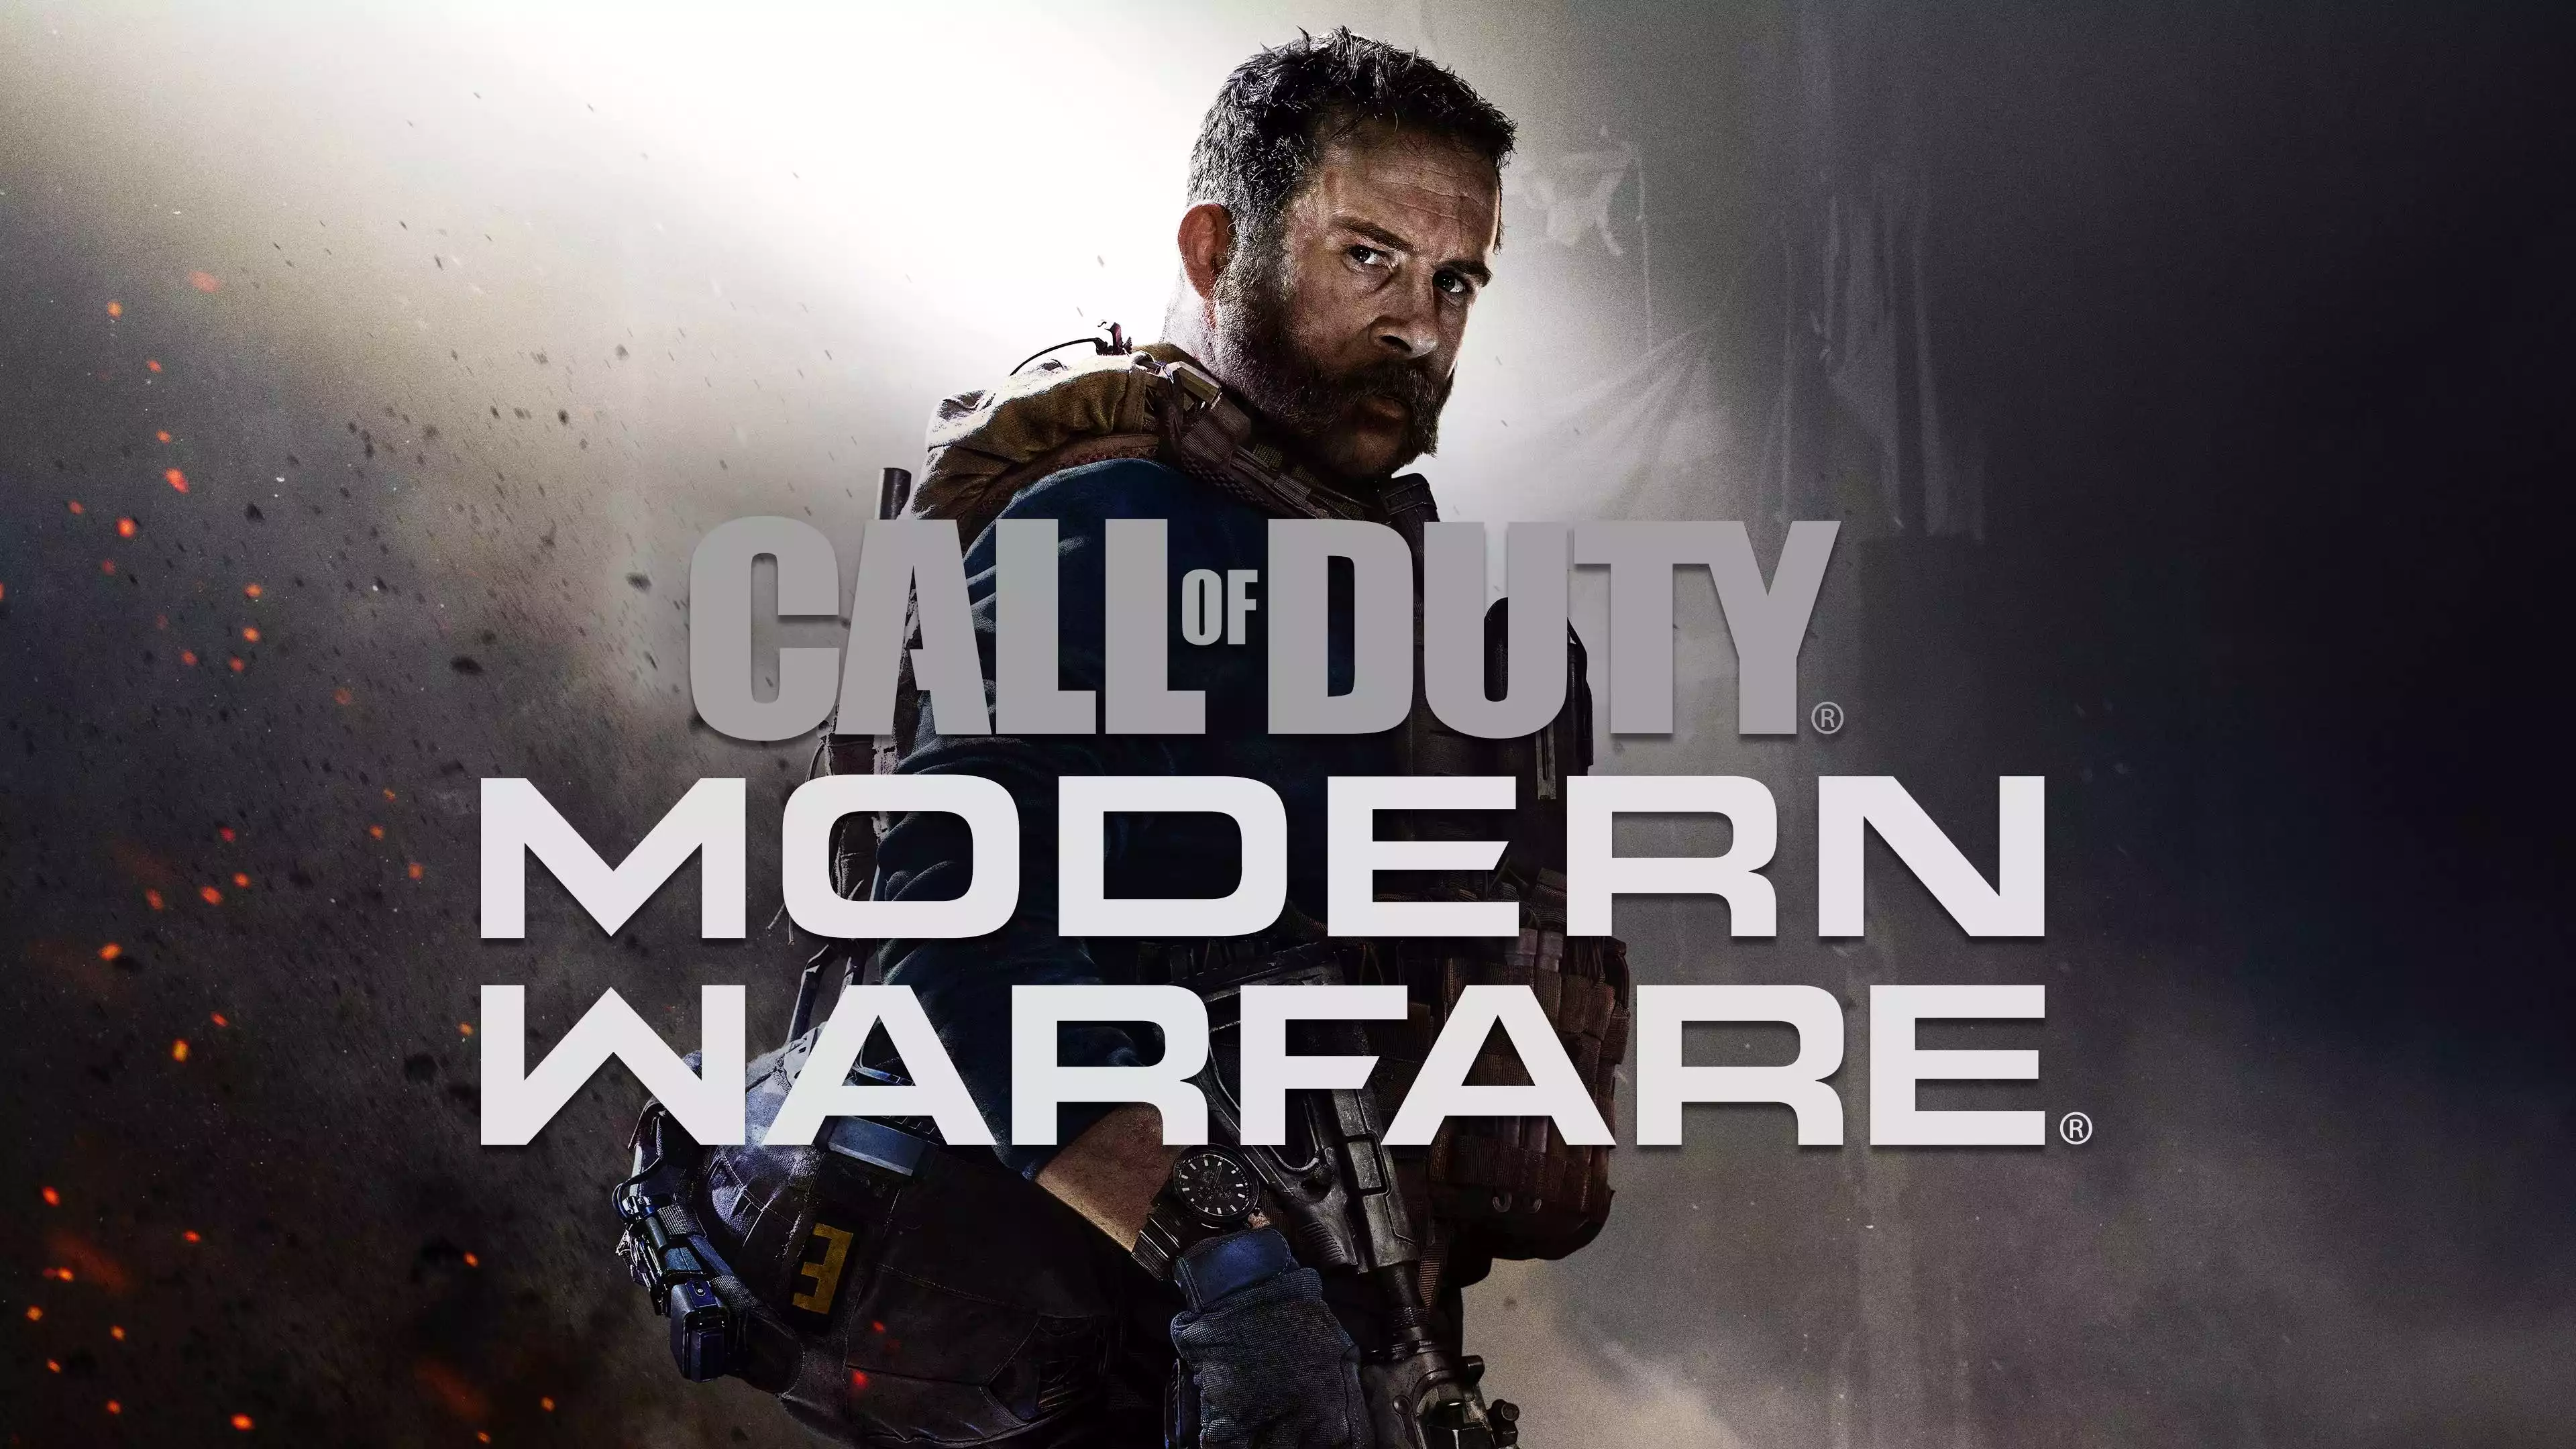 Why is the current Modern Warfare the best selling Call of Duty ever?